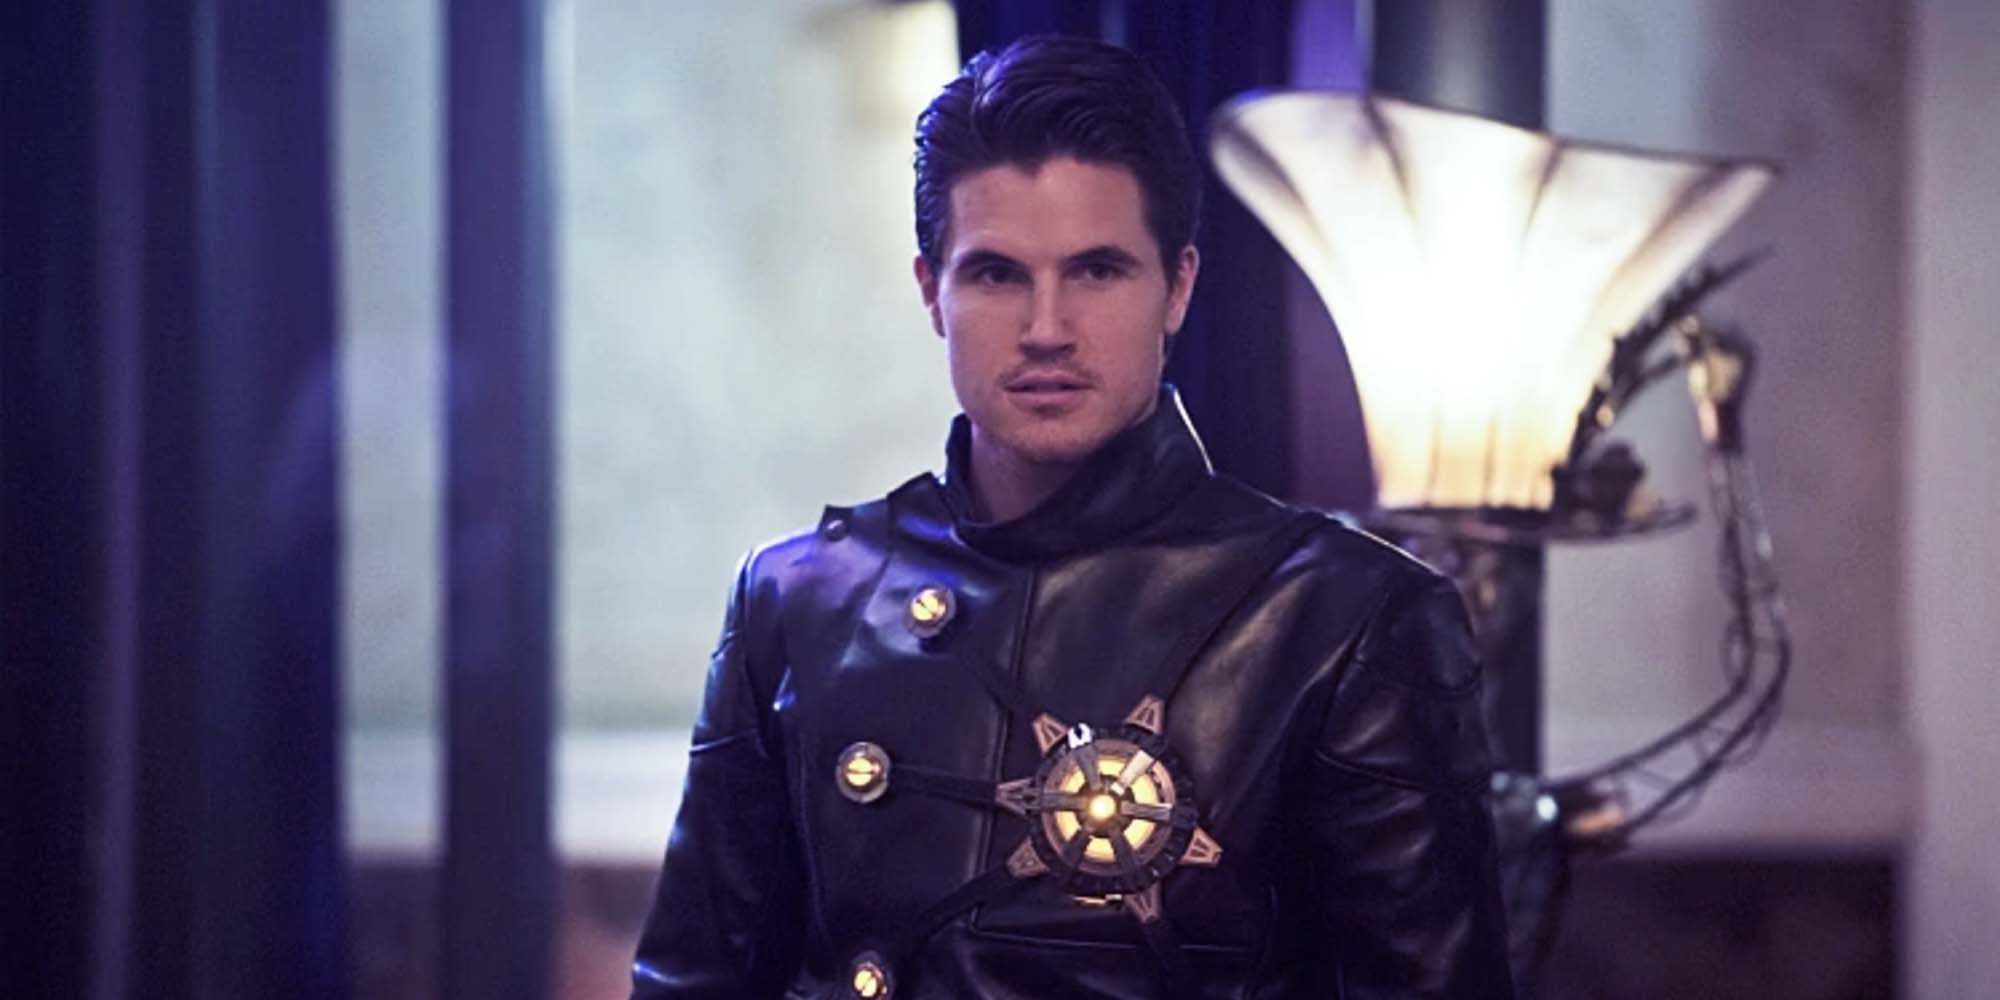 Robbie Amell as Ronnie Raymond in The Flash.